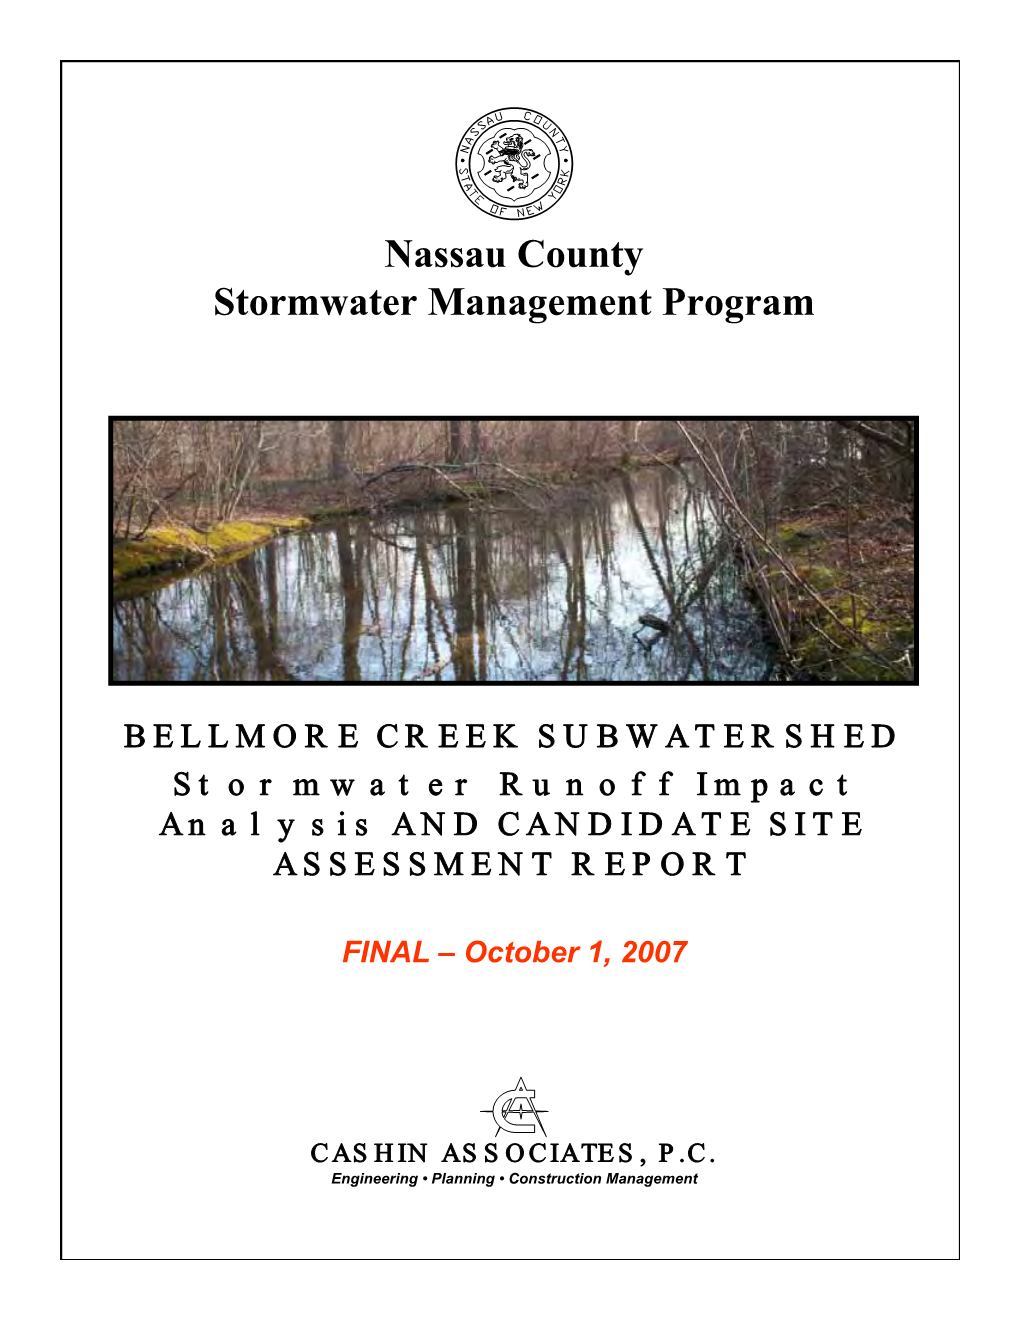 BELLMORE CREEK SUBWATERSHED Stormwater Runoff Impact Analysis and CANDIDATE SITE ASSESSMENT REPORT